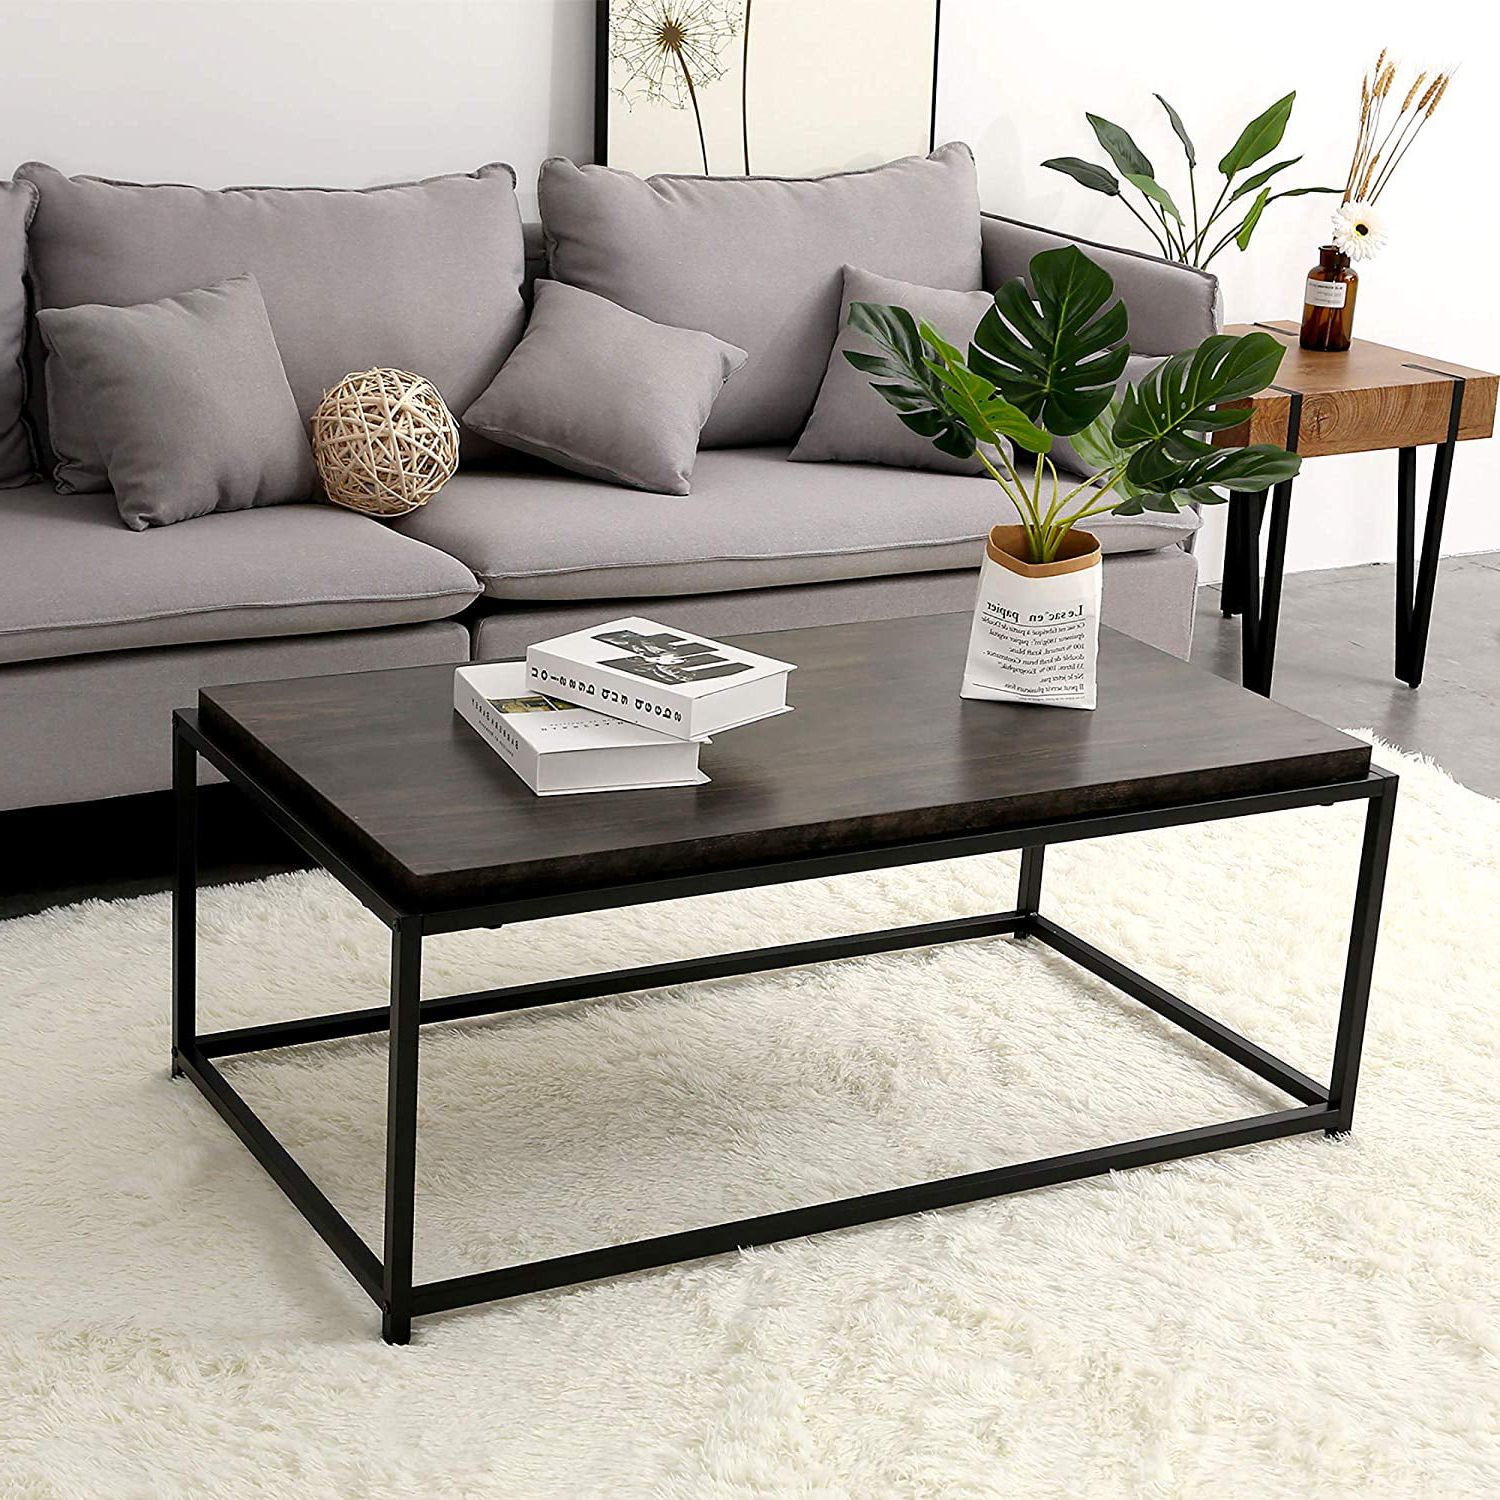 Ivinta Wood Coffee Table Modern Industrial Space Saving Couch Living With Regard To Espresso Wood Finish Coffee Tables (View 10 of 20)